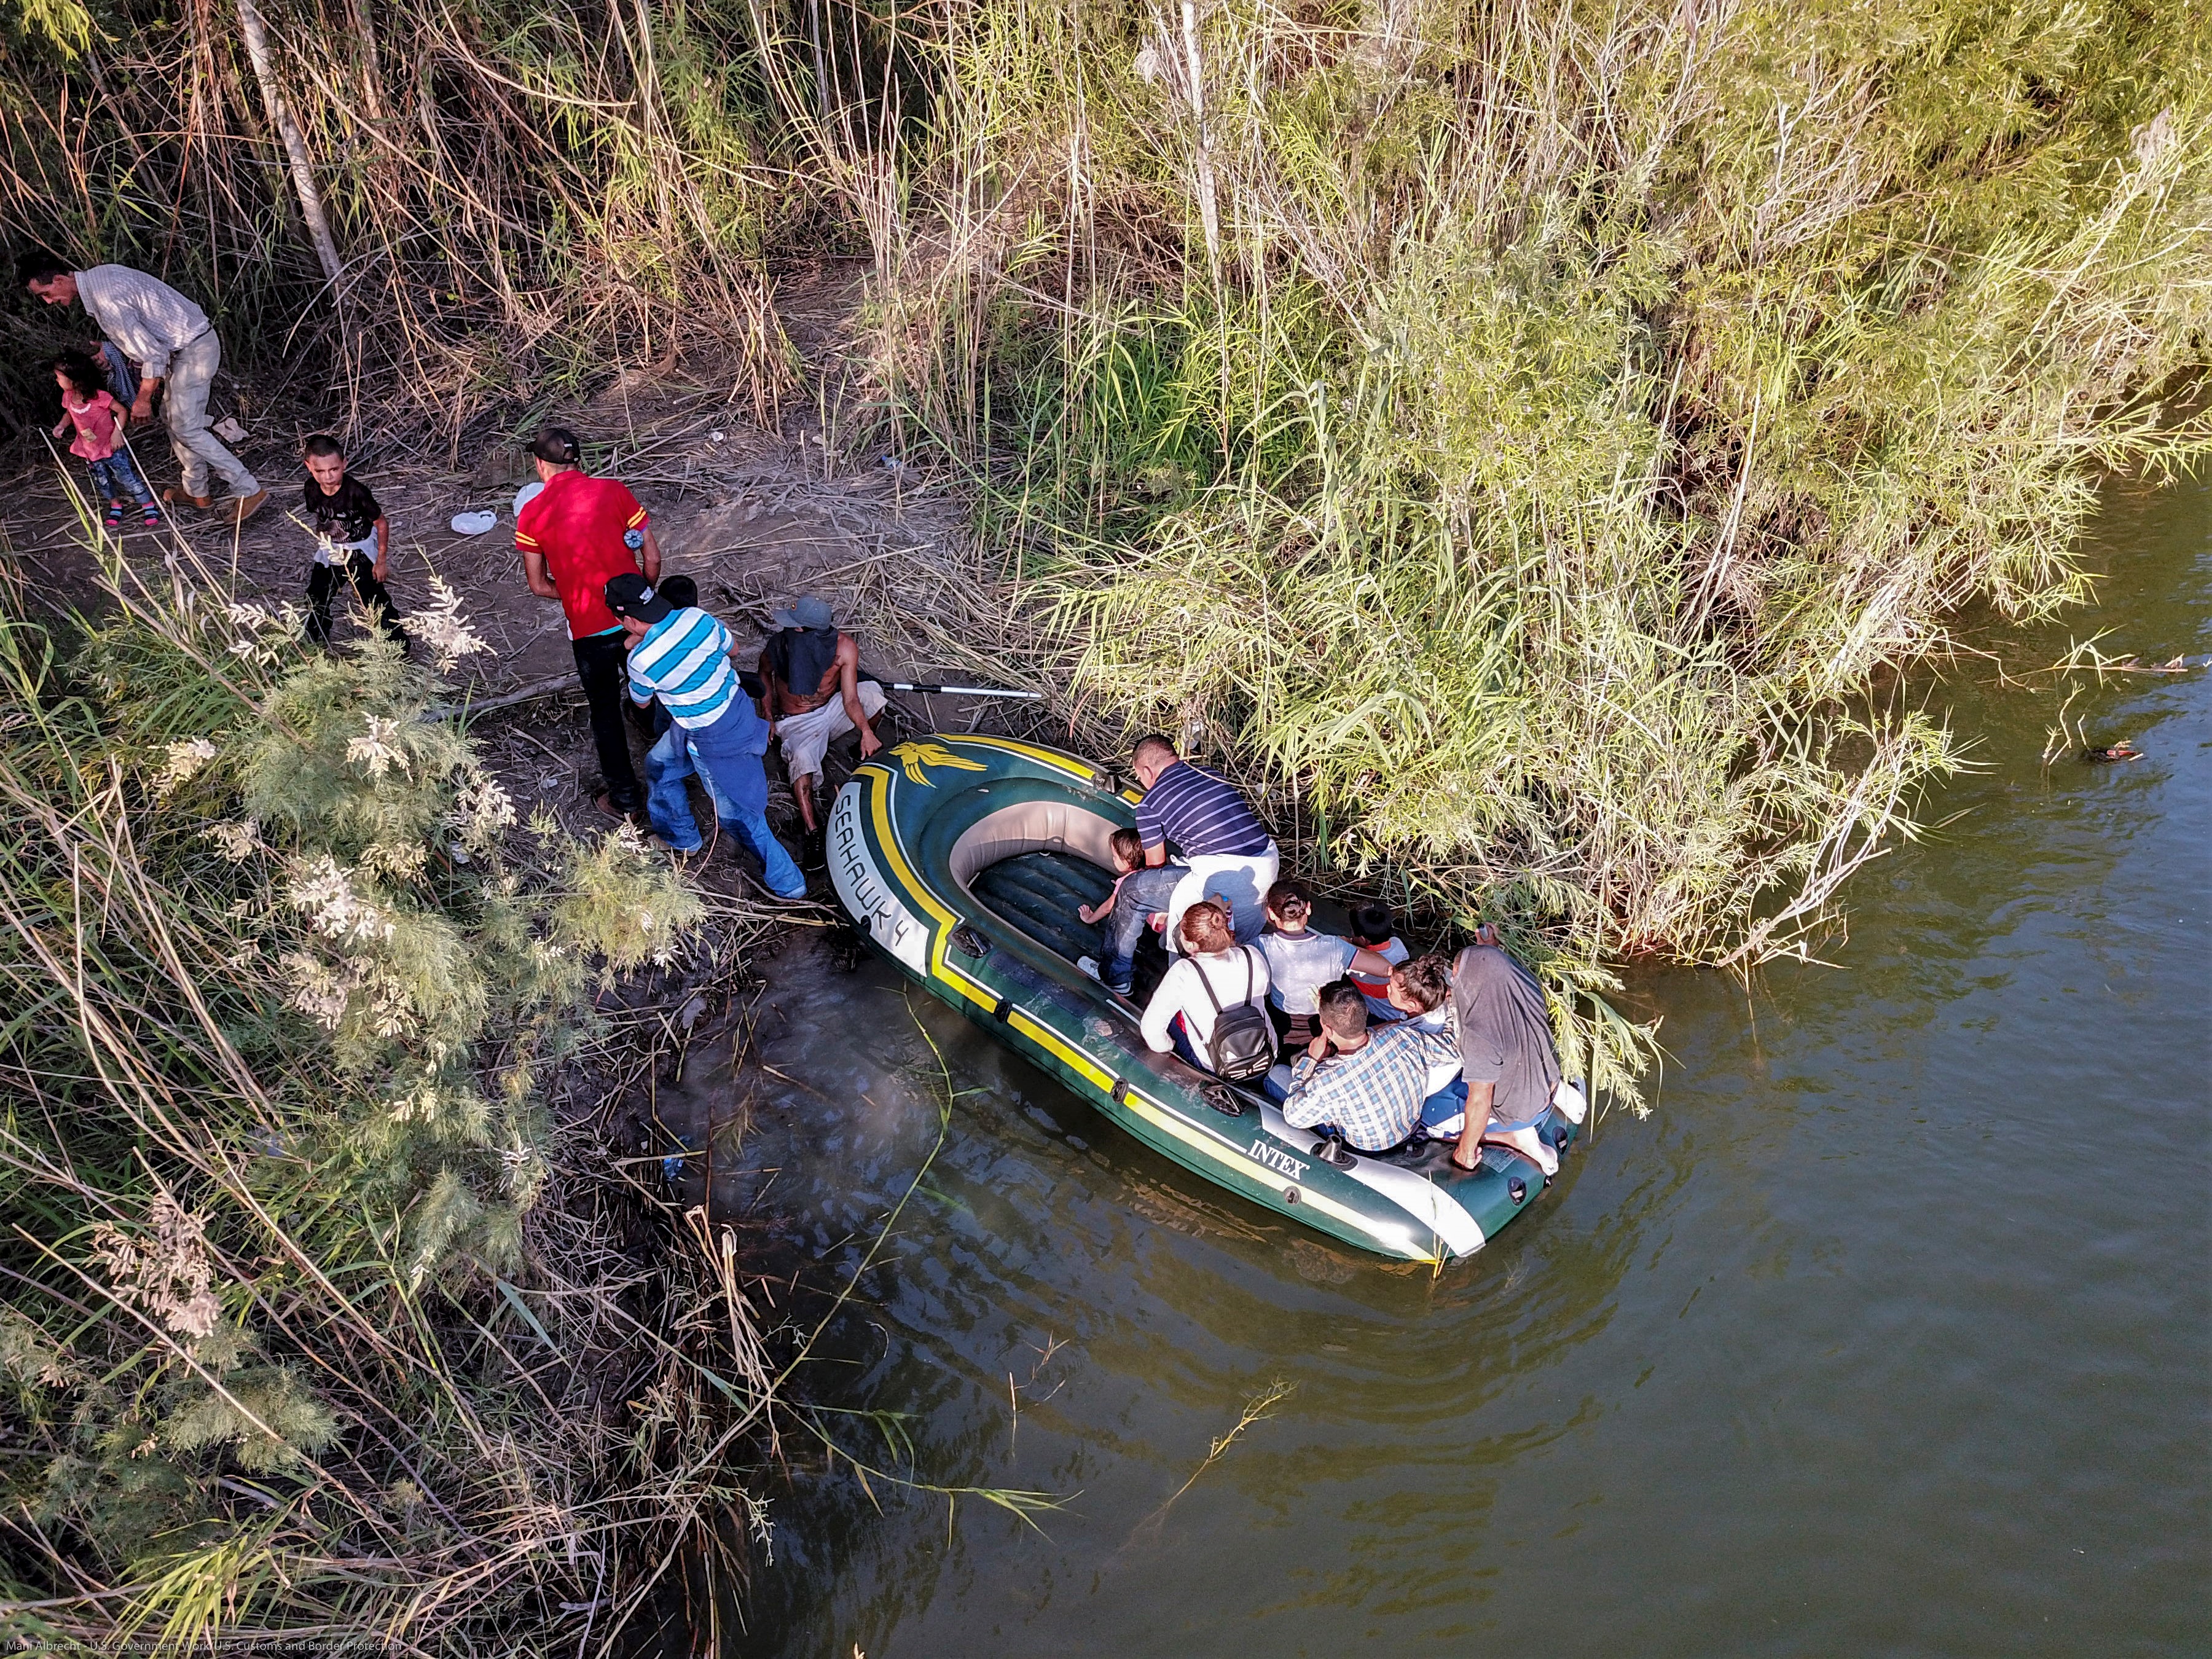 A group of illegal aliens use a raft to enter the United States